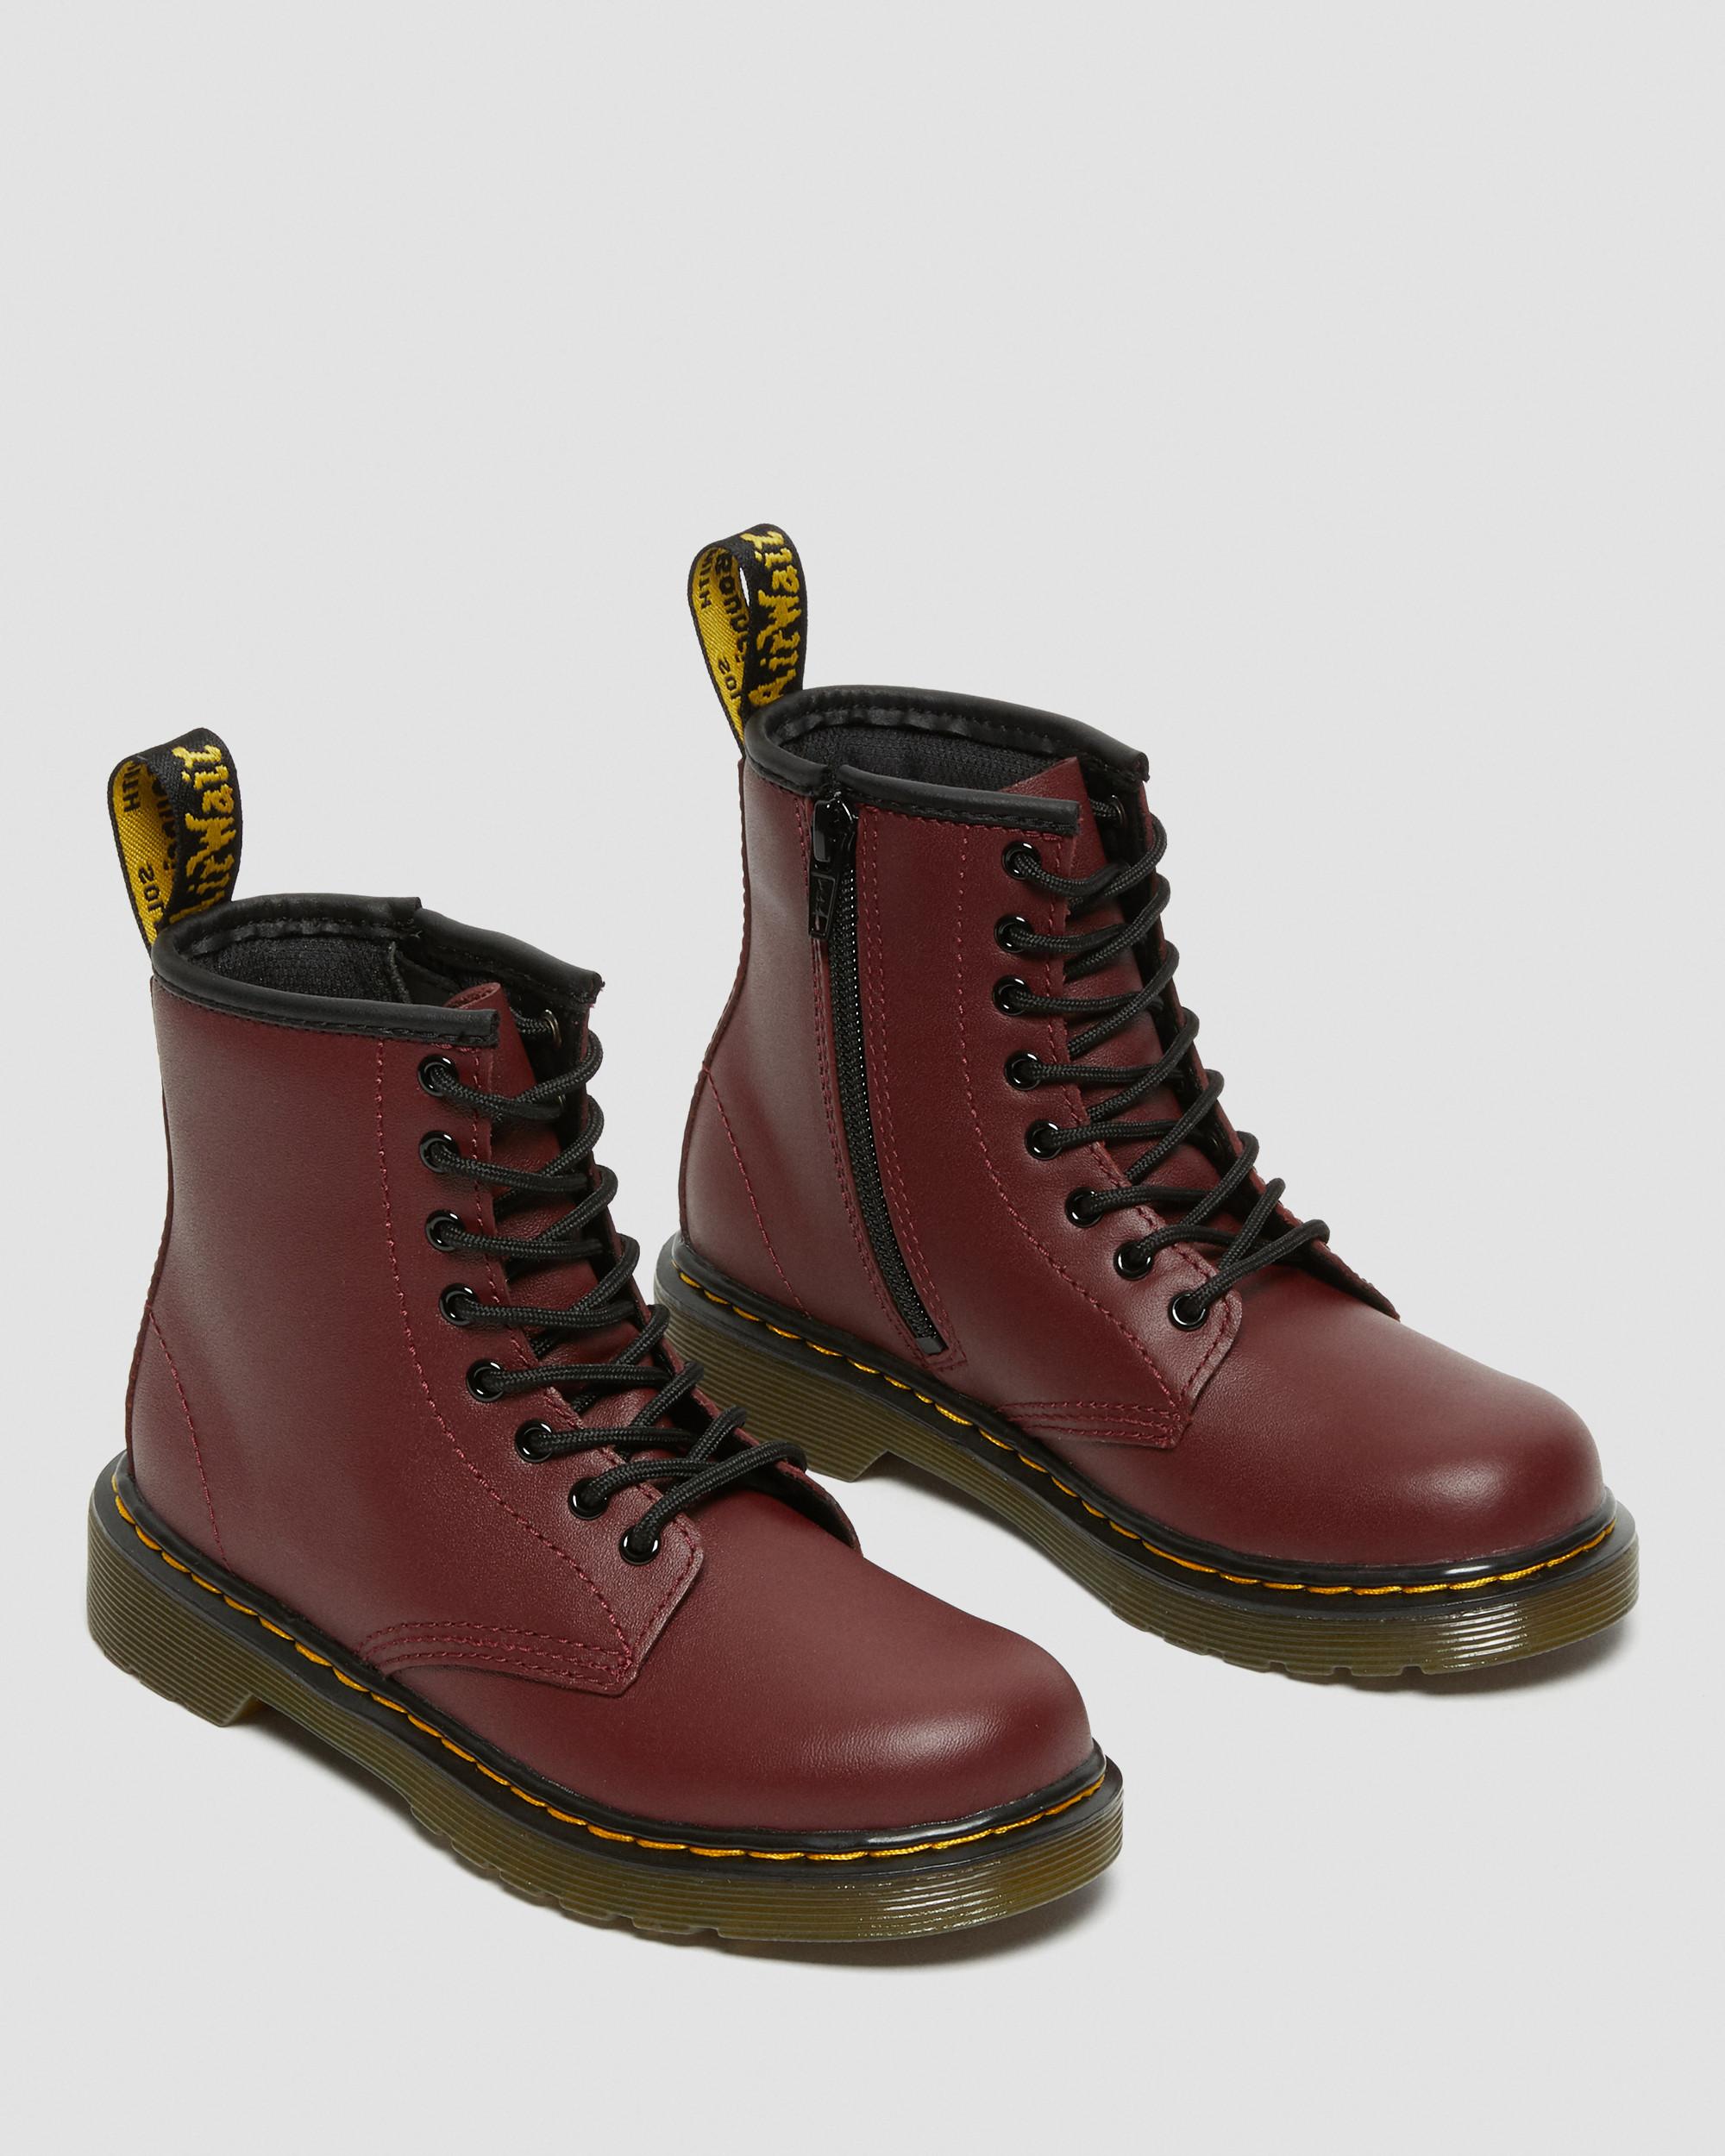 Junior 1460 Softy T Leather Lace Up BootsJunior 1460 Softy T Leather Lace Up Boots Dr. Martens